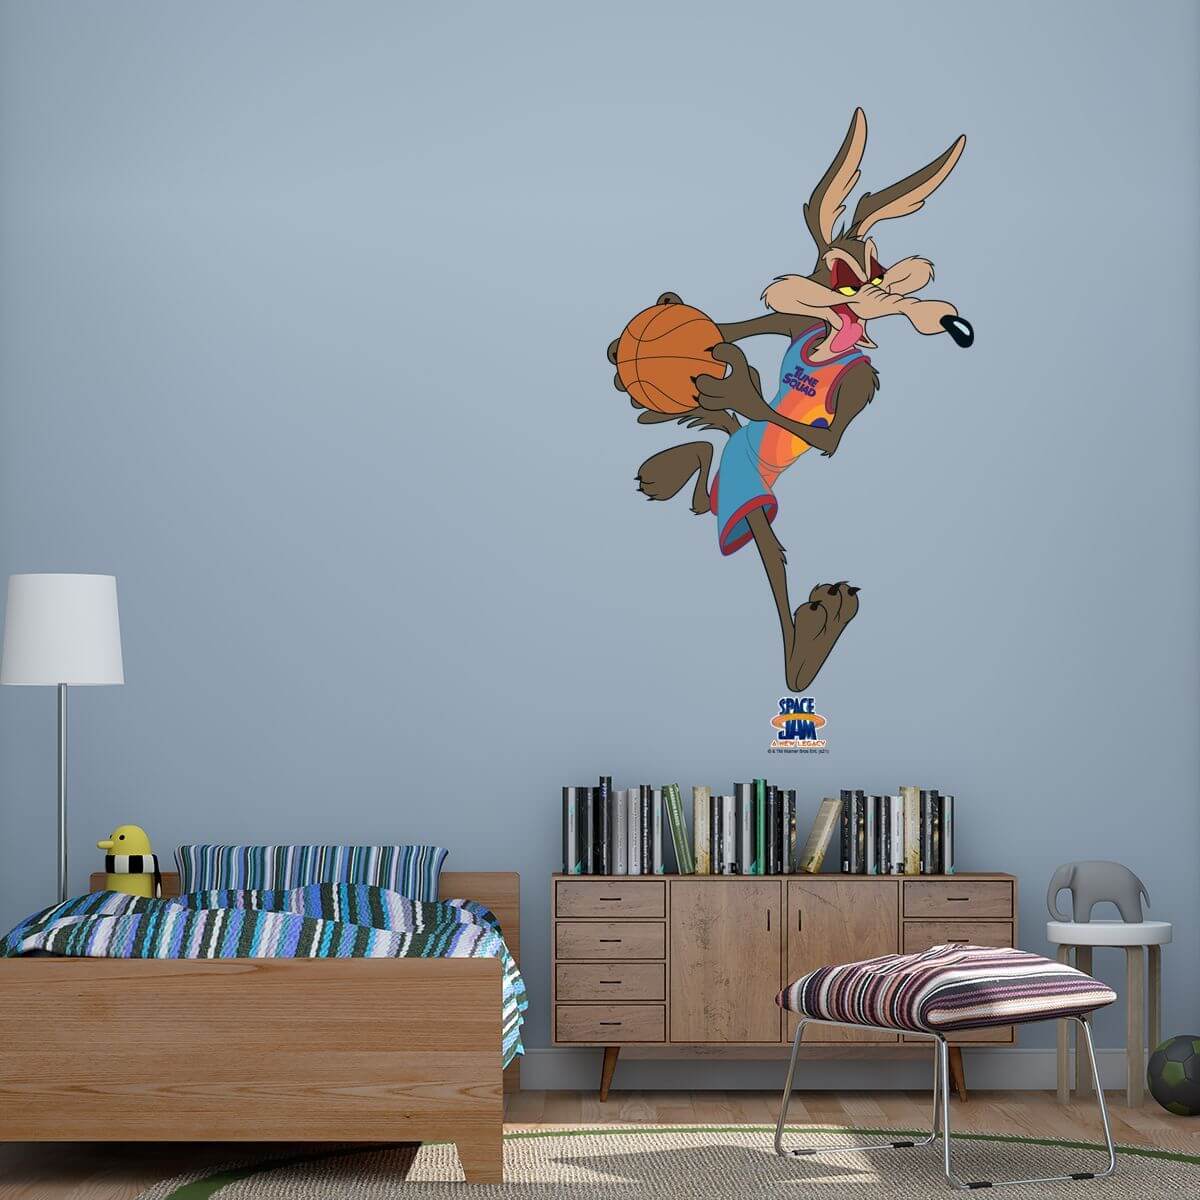 Kismet Decals Space Jam: A New Legacy Wile E. Coyote Licensed Wall Sticker - Easy DIY Looney Tunes Home & Room Decor - Kismet Decals